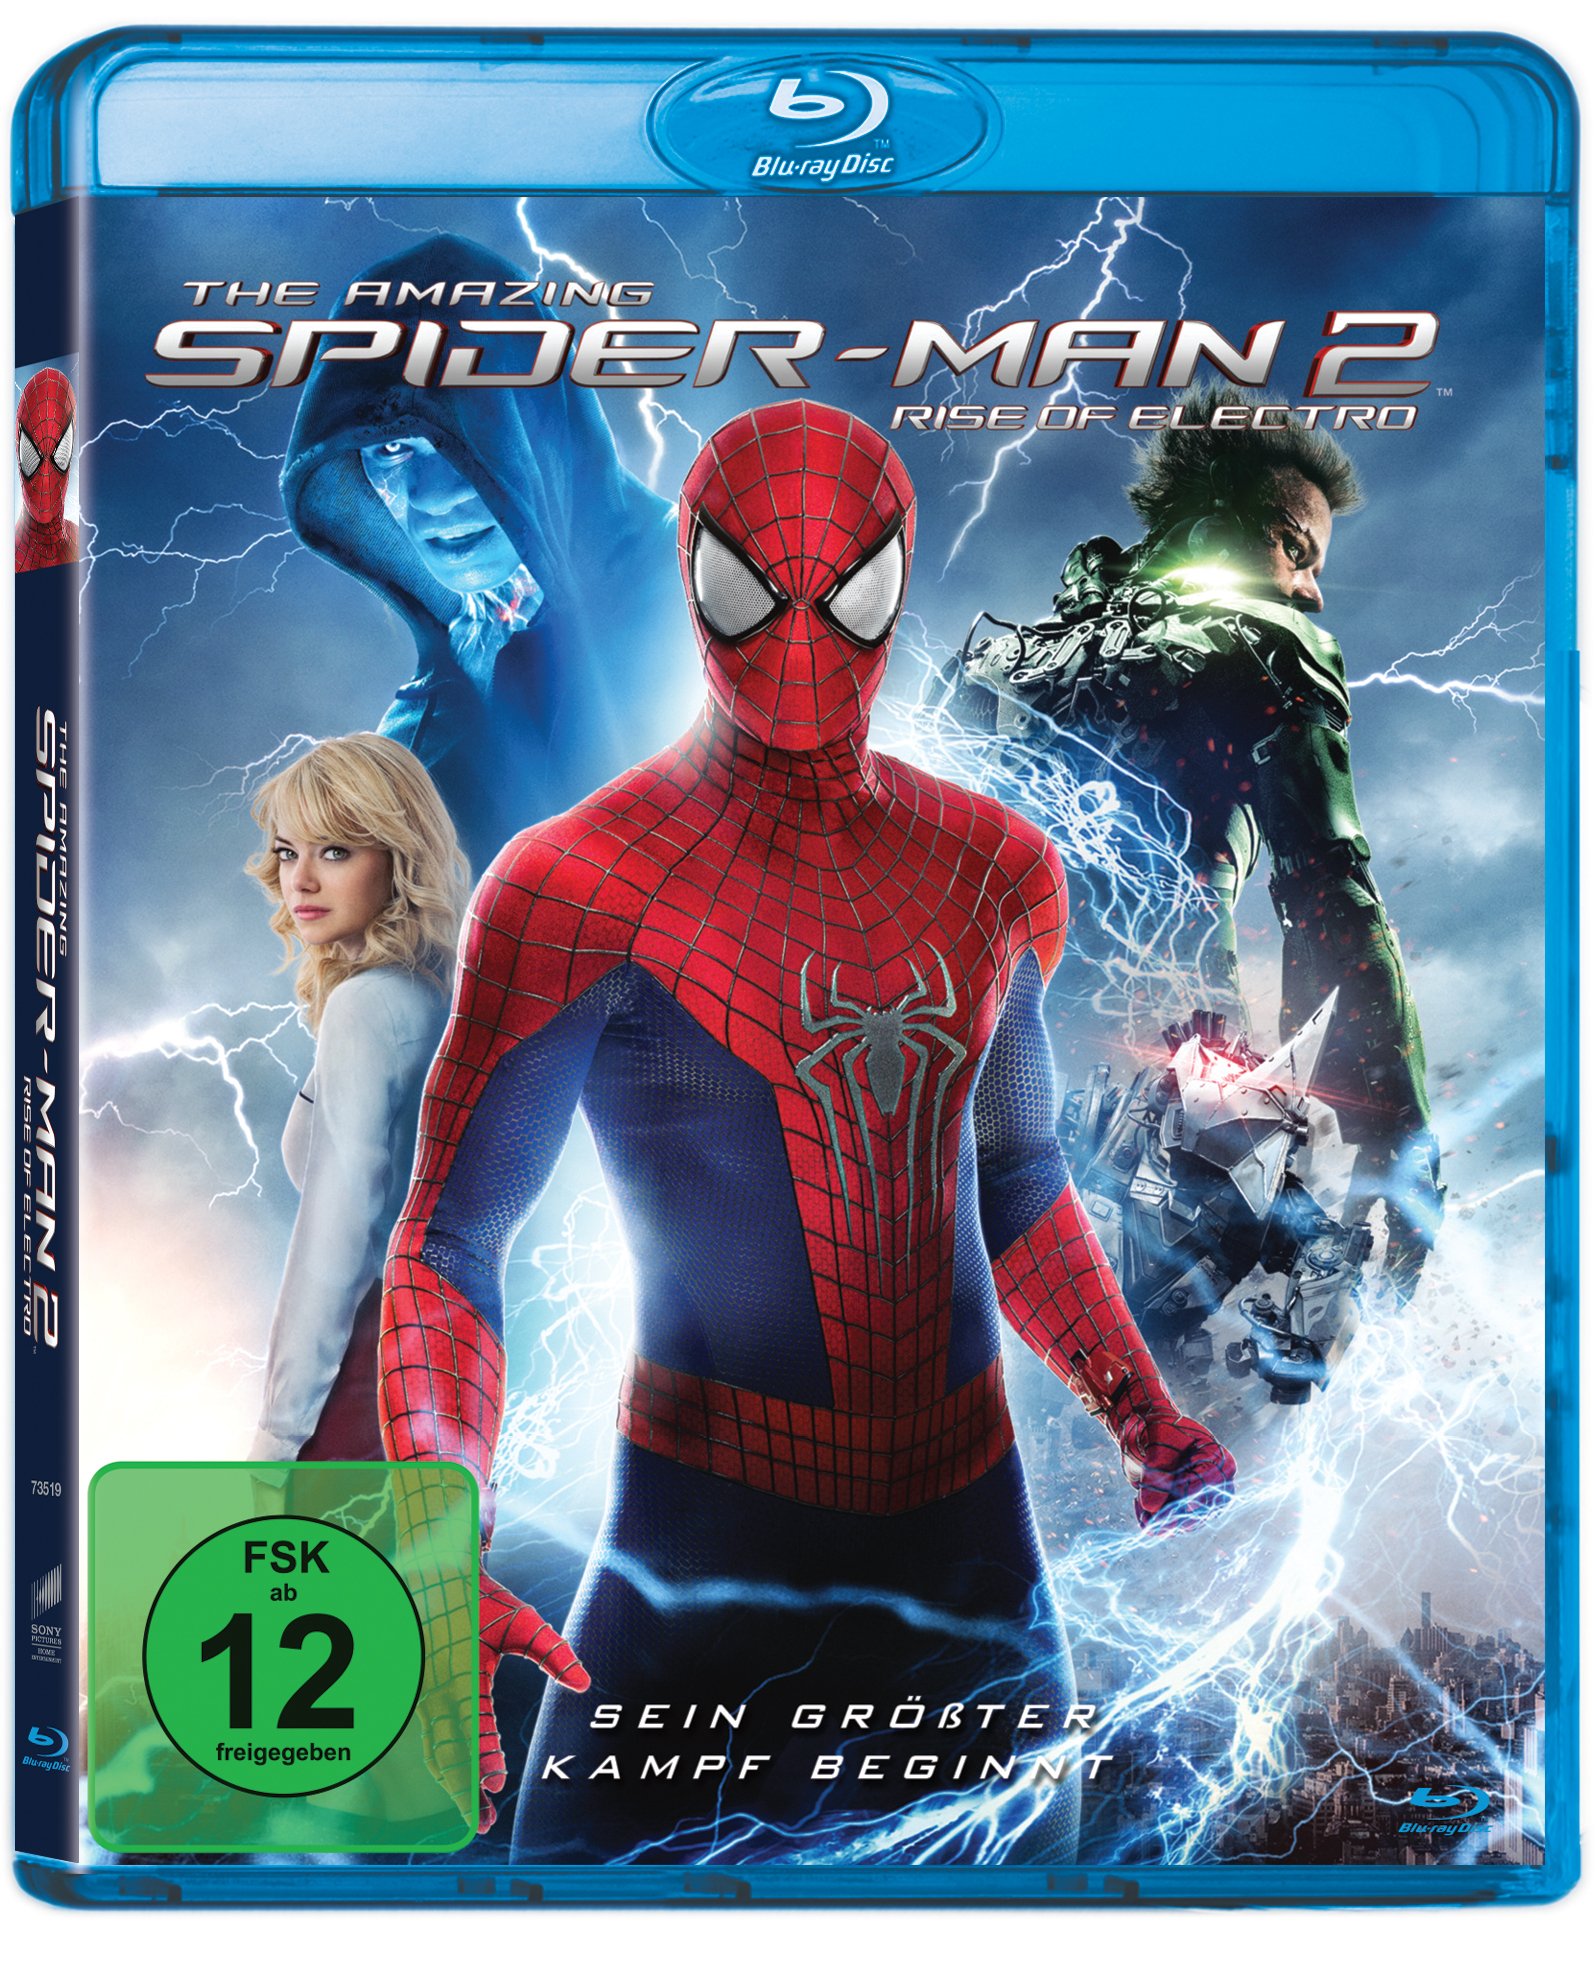 Spider-Man Blu-ray 2: Amazing Rise Electro of The